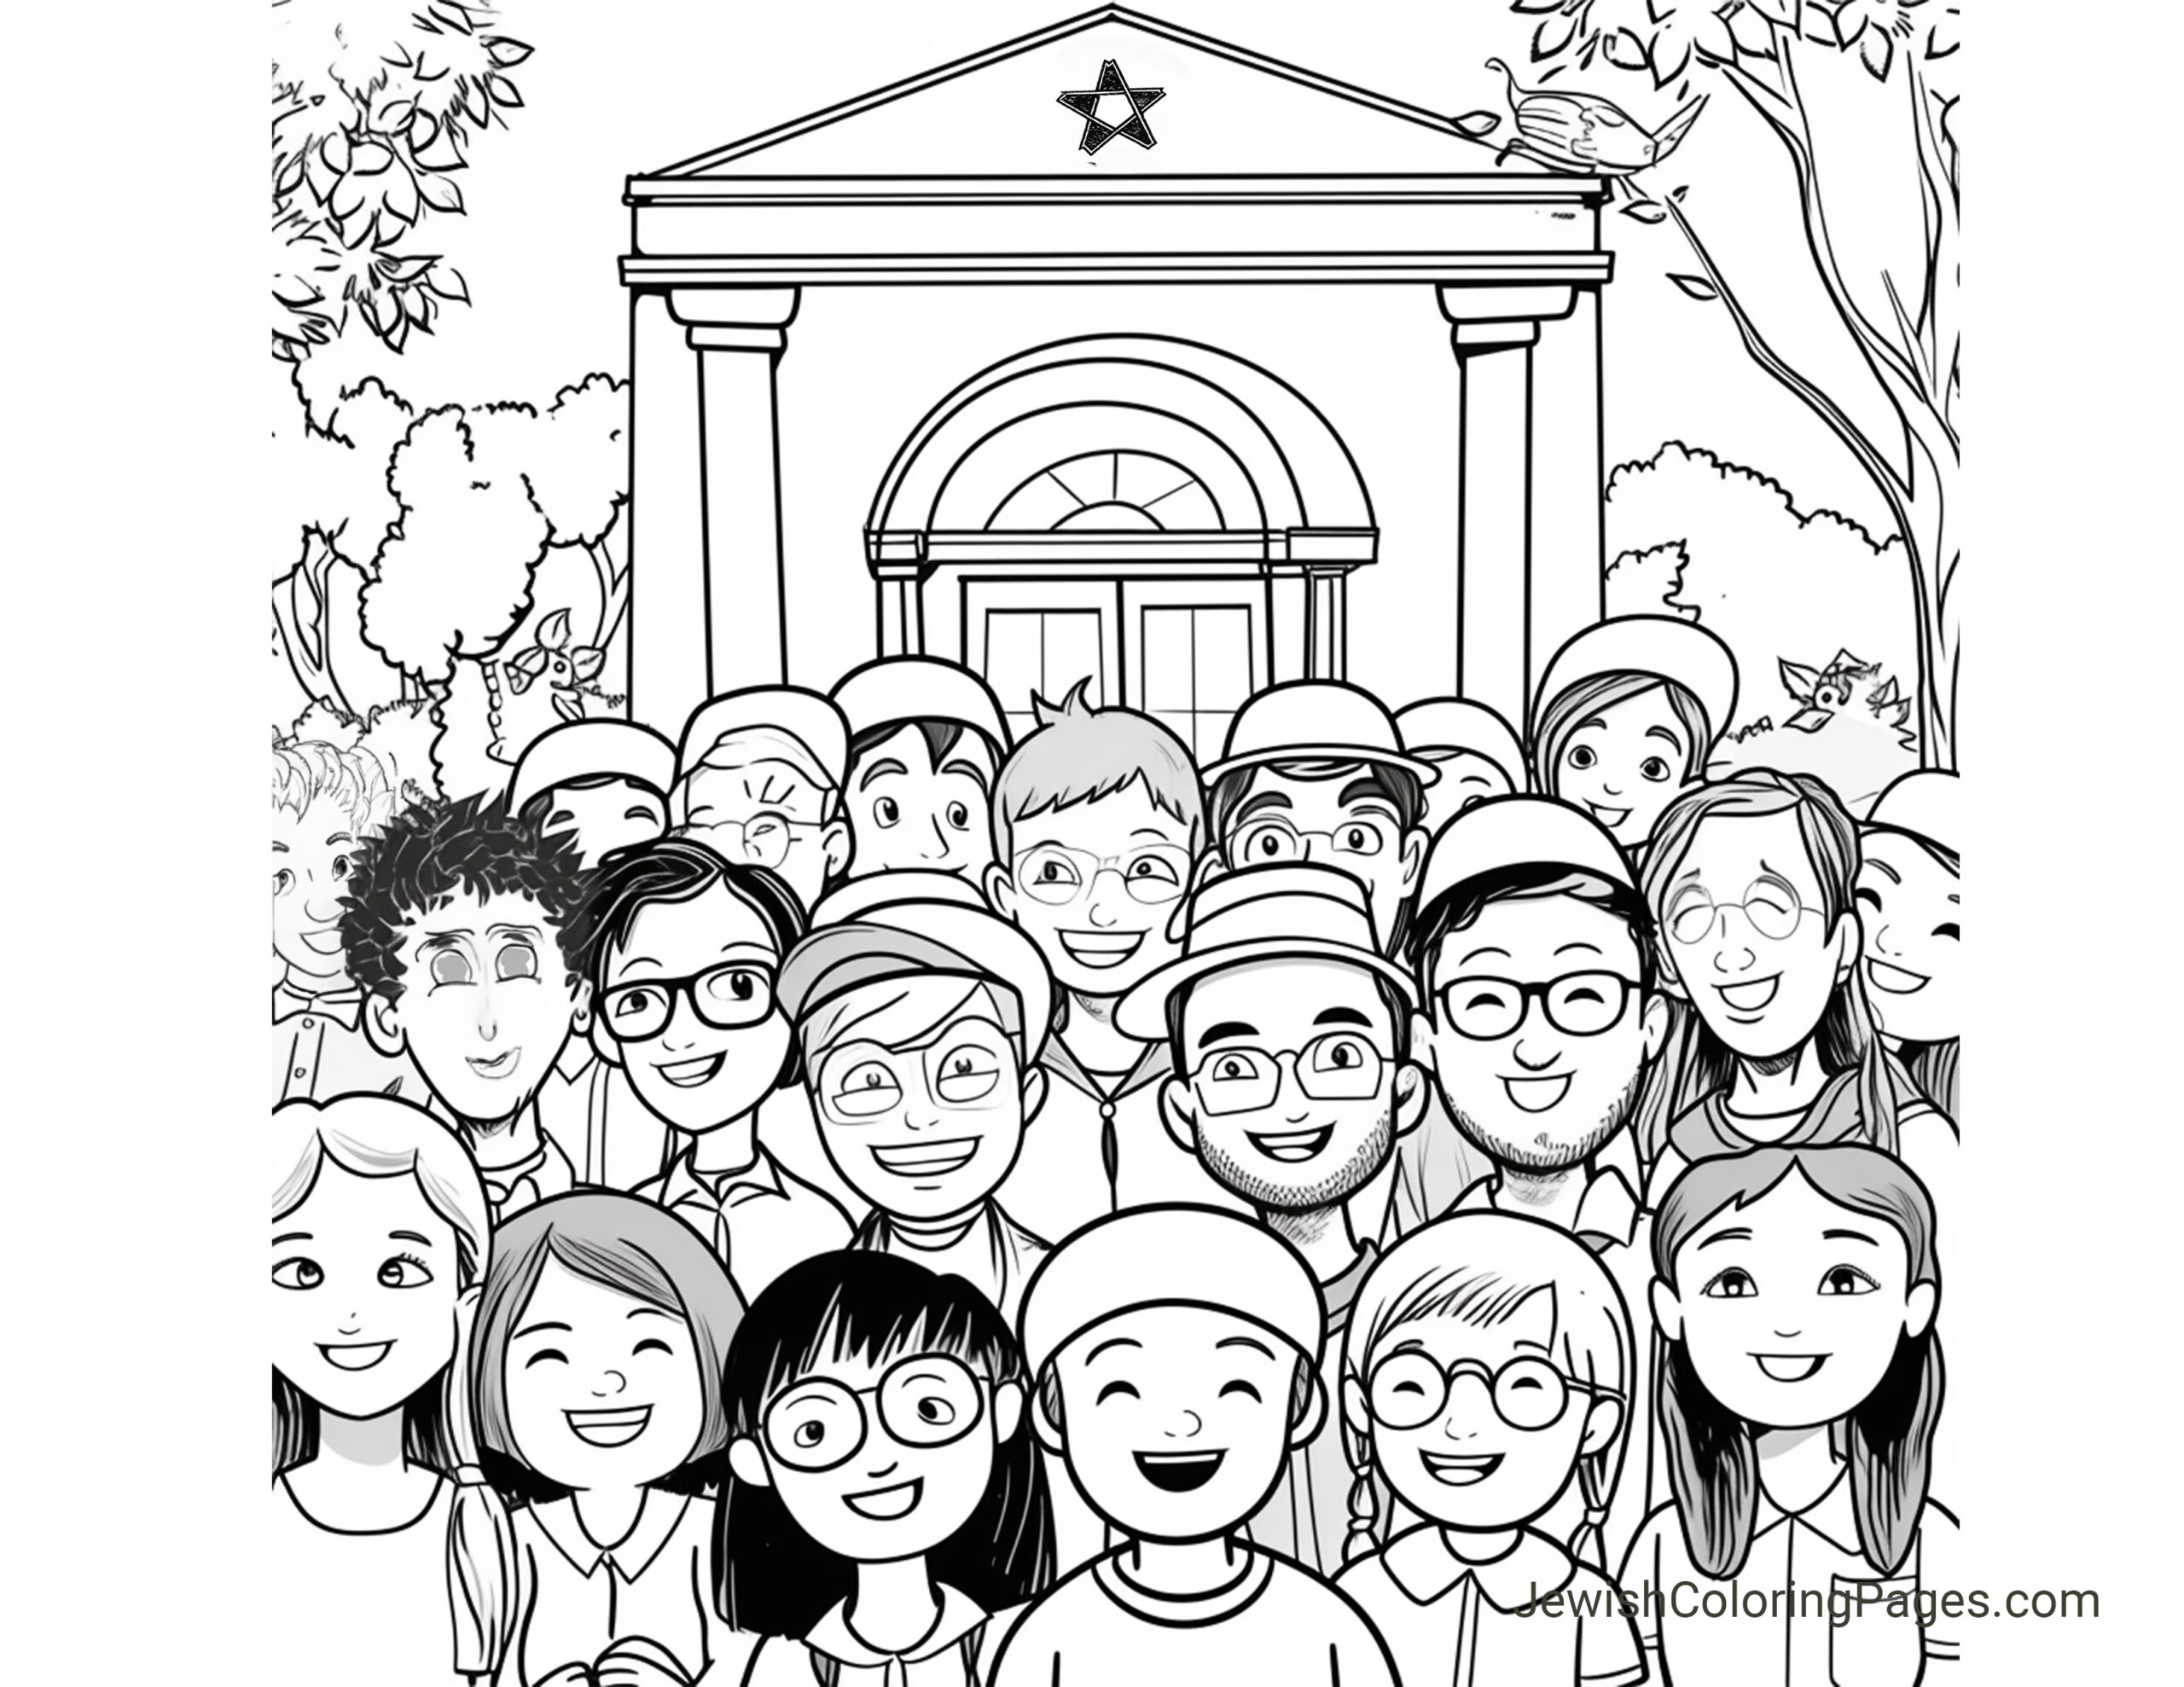 Jewish Community With Synagogue Free Printable Coloring Page